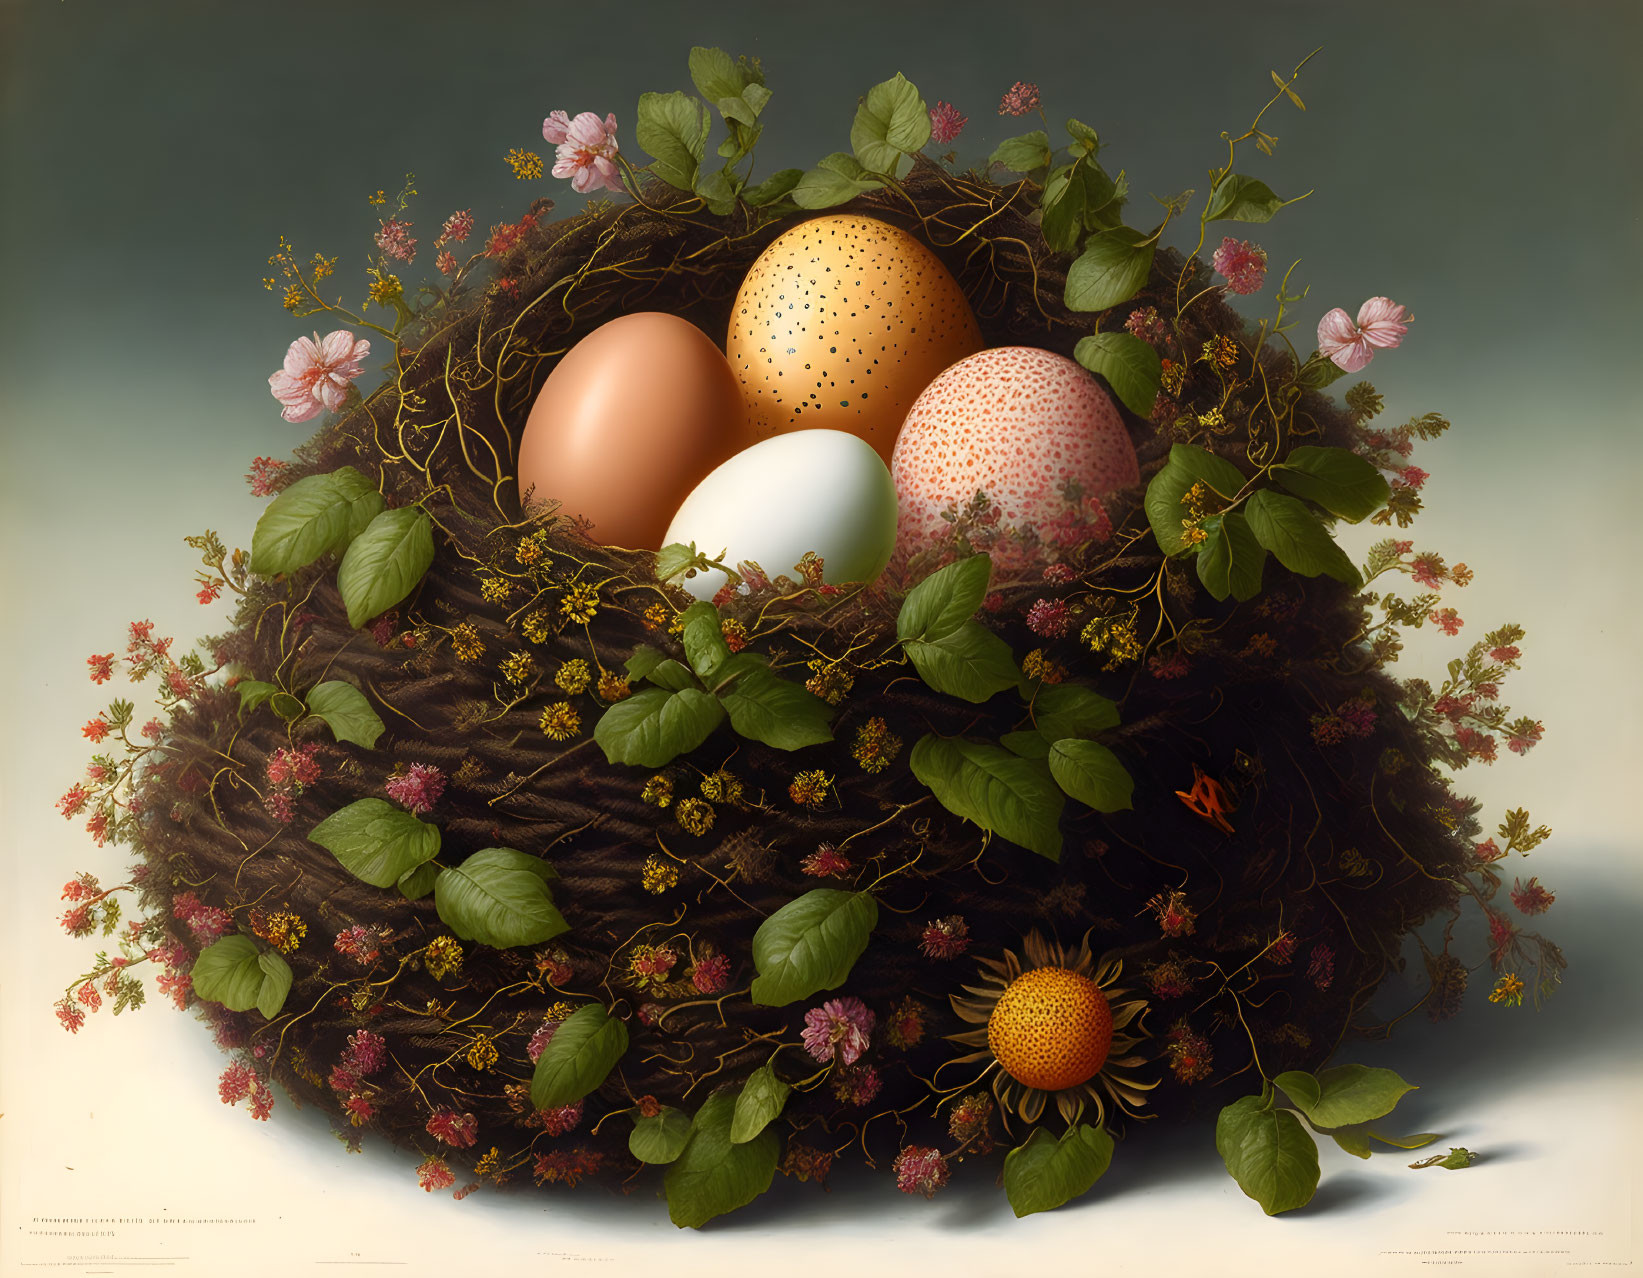 Flowers, insects and eggs in a nest, 1689